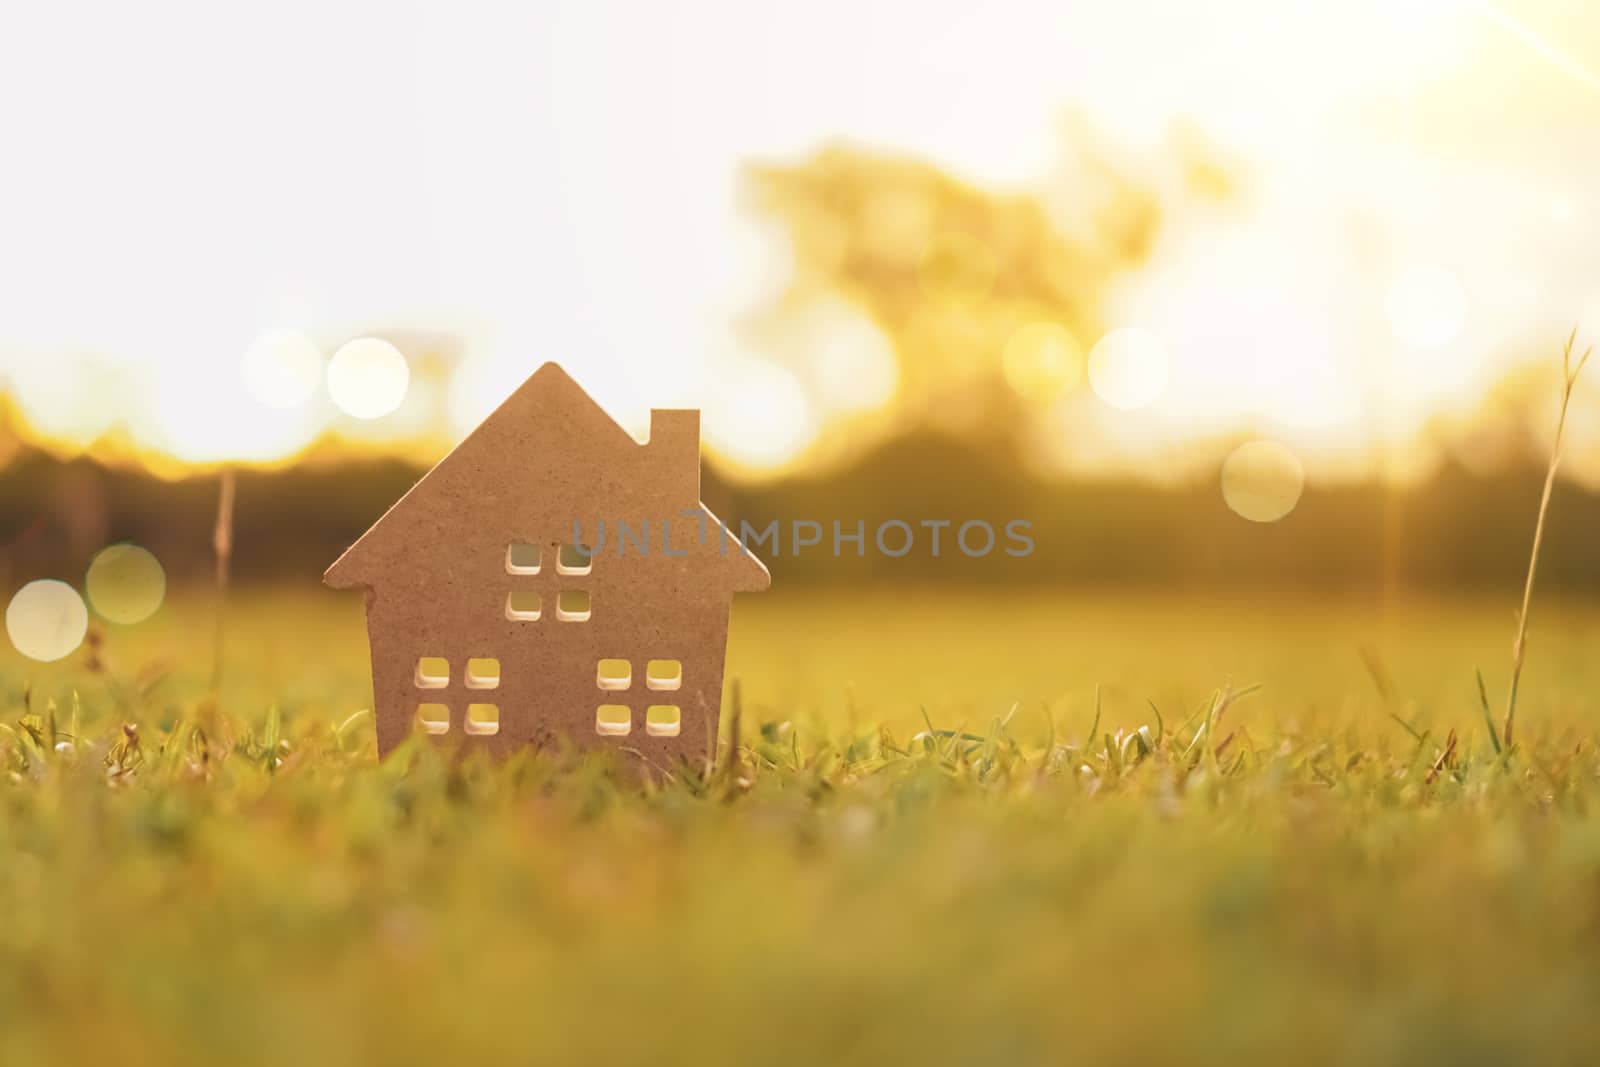 Closed up tiny home model on green grass with sunlight background. by Suwant